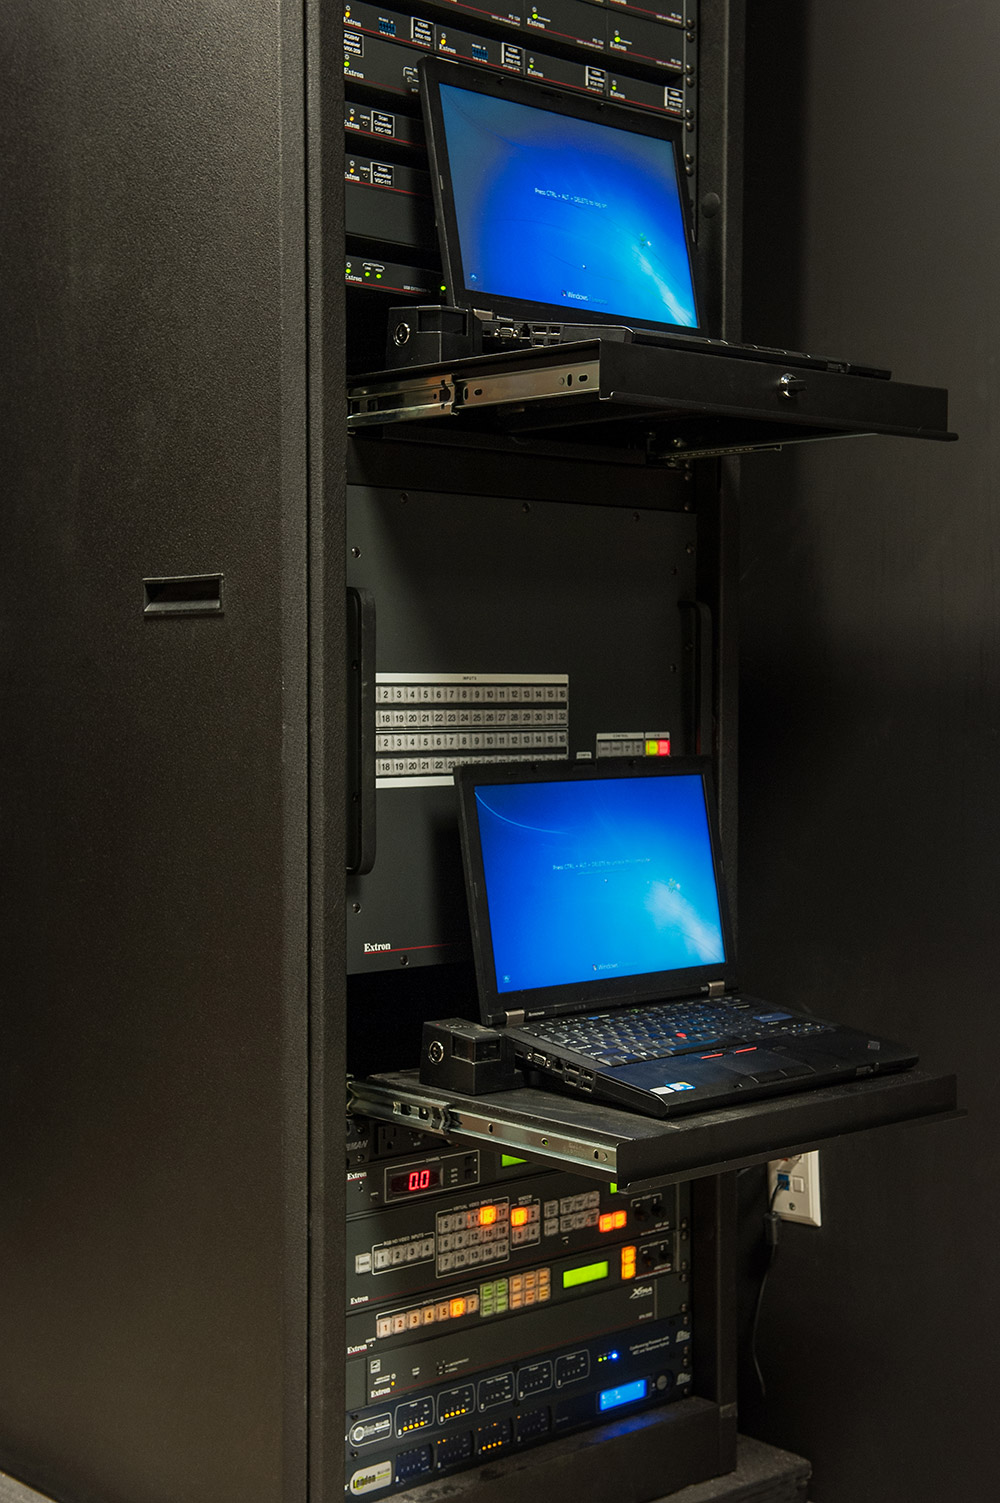 AV equipment for the Executive Conference Room is rack-mounted in a room located behind the embedded 103" plasma display.